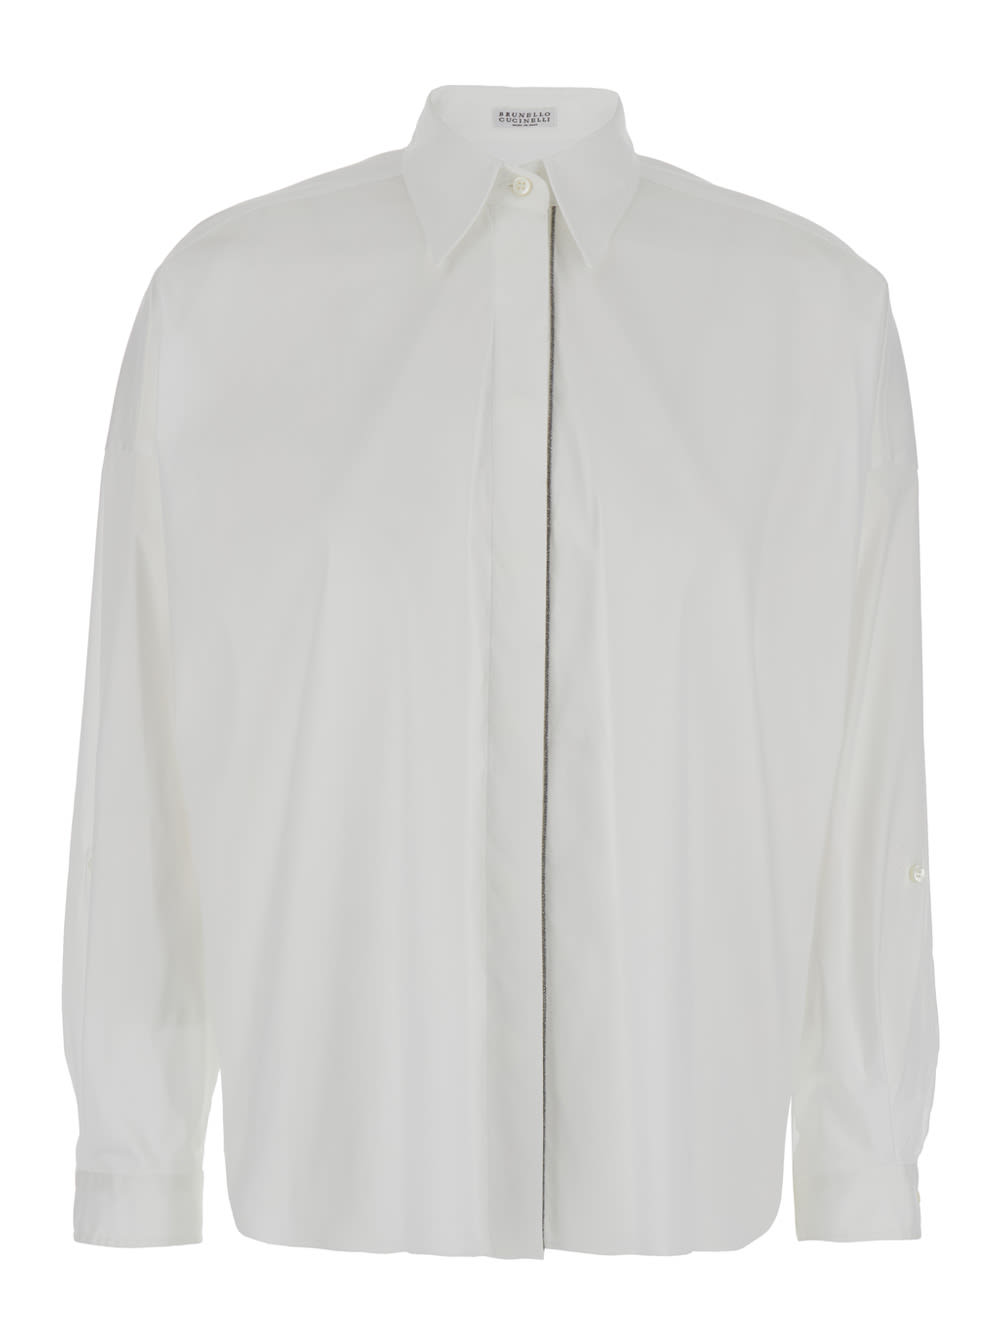 Brunello Cucinelli Oversized White Shirt With Monile Detail In Cotton Blend Woman